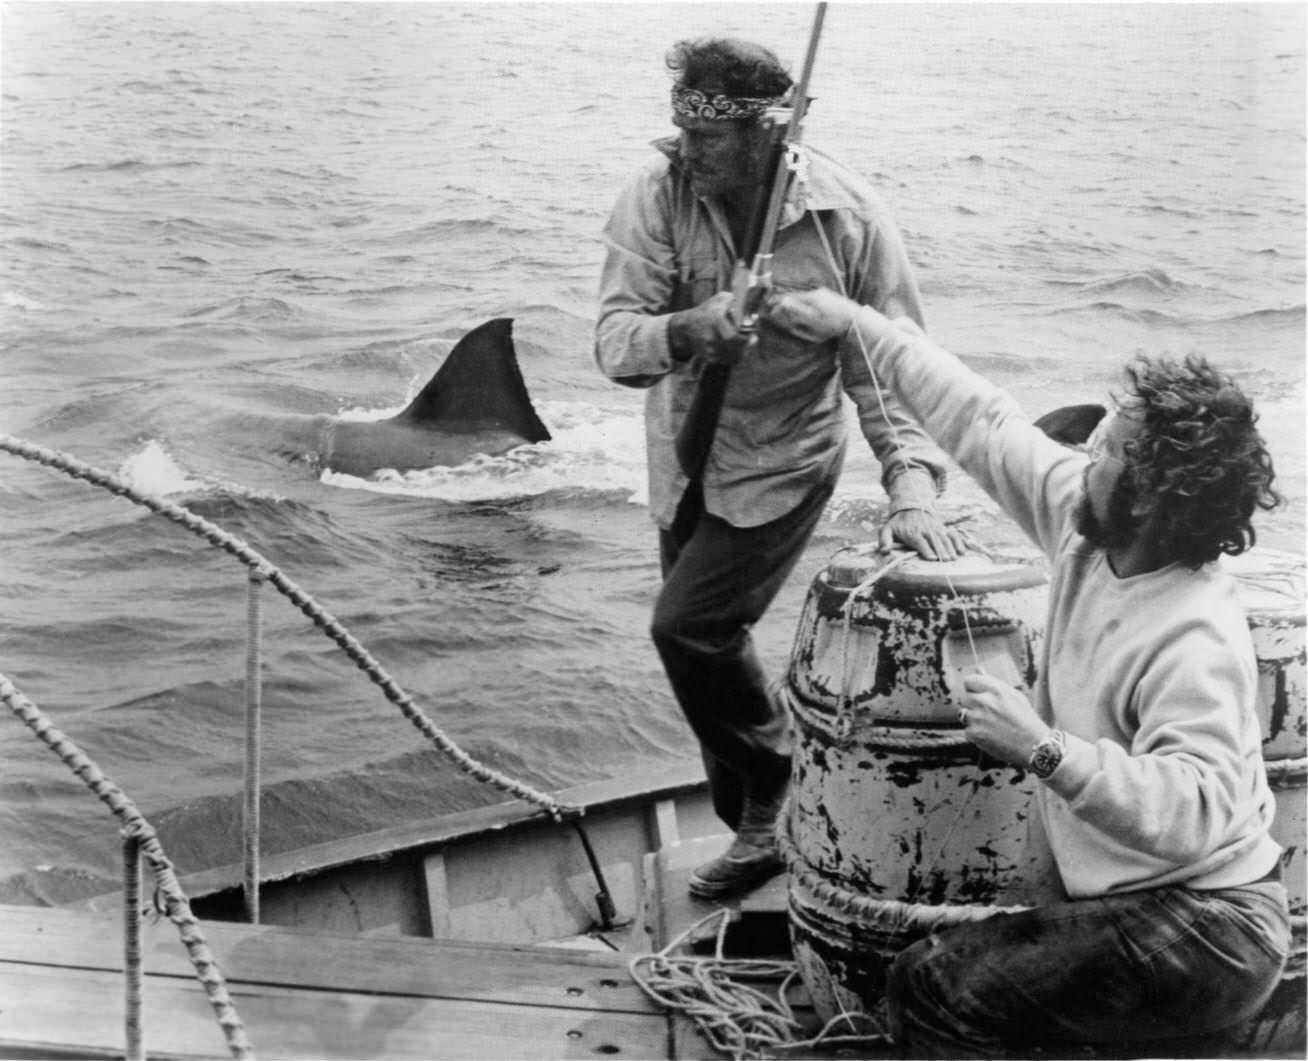 Robert Shaw and Richard Dreyfuss prepare to do battle with a mammoth man eating Great White Shark in a scene from the film 'Jaws', 1975.